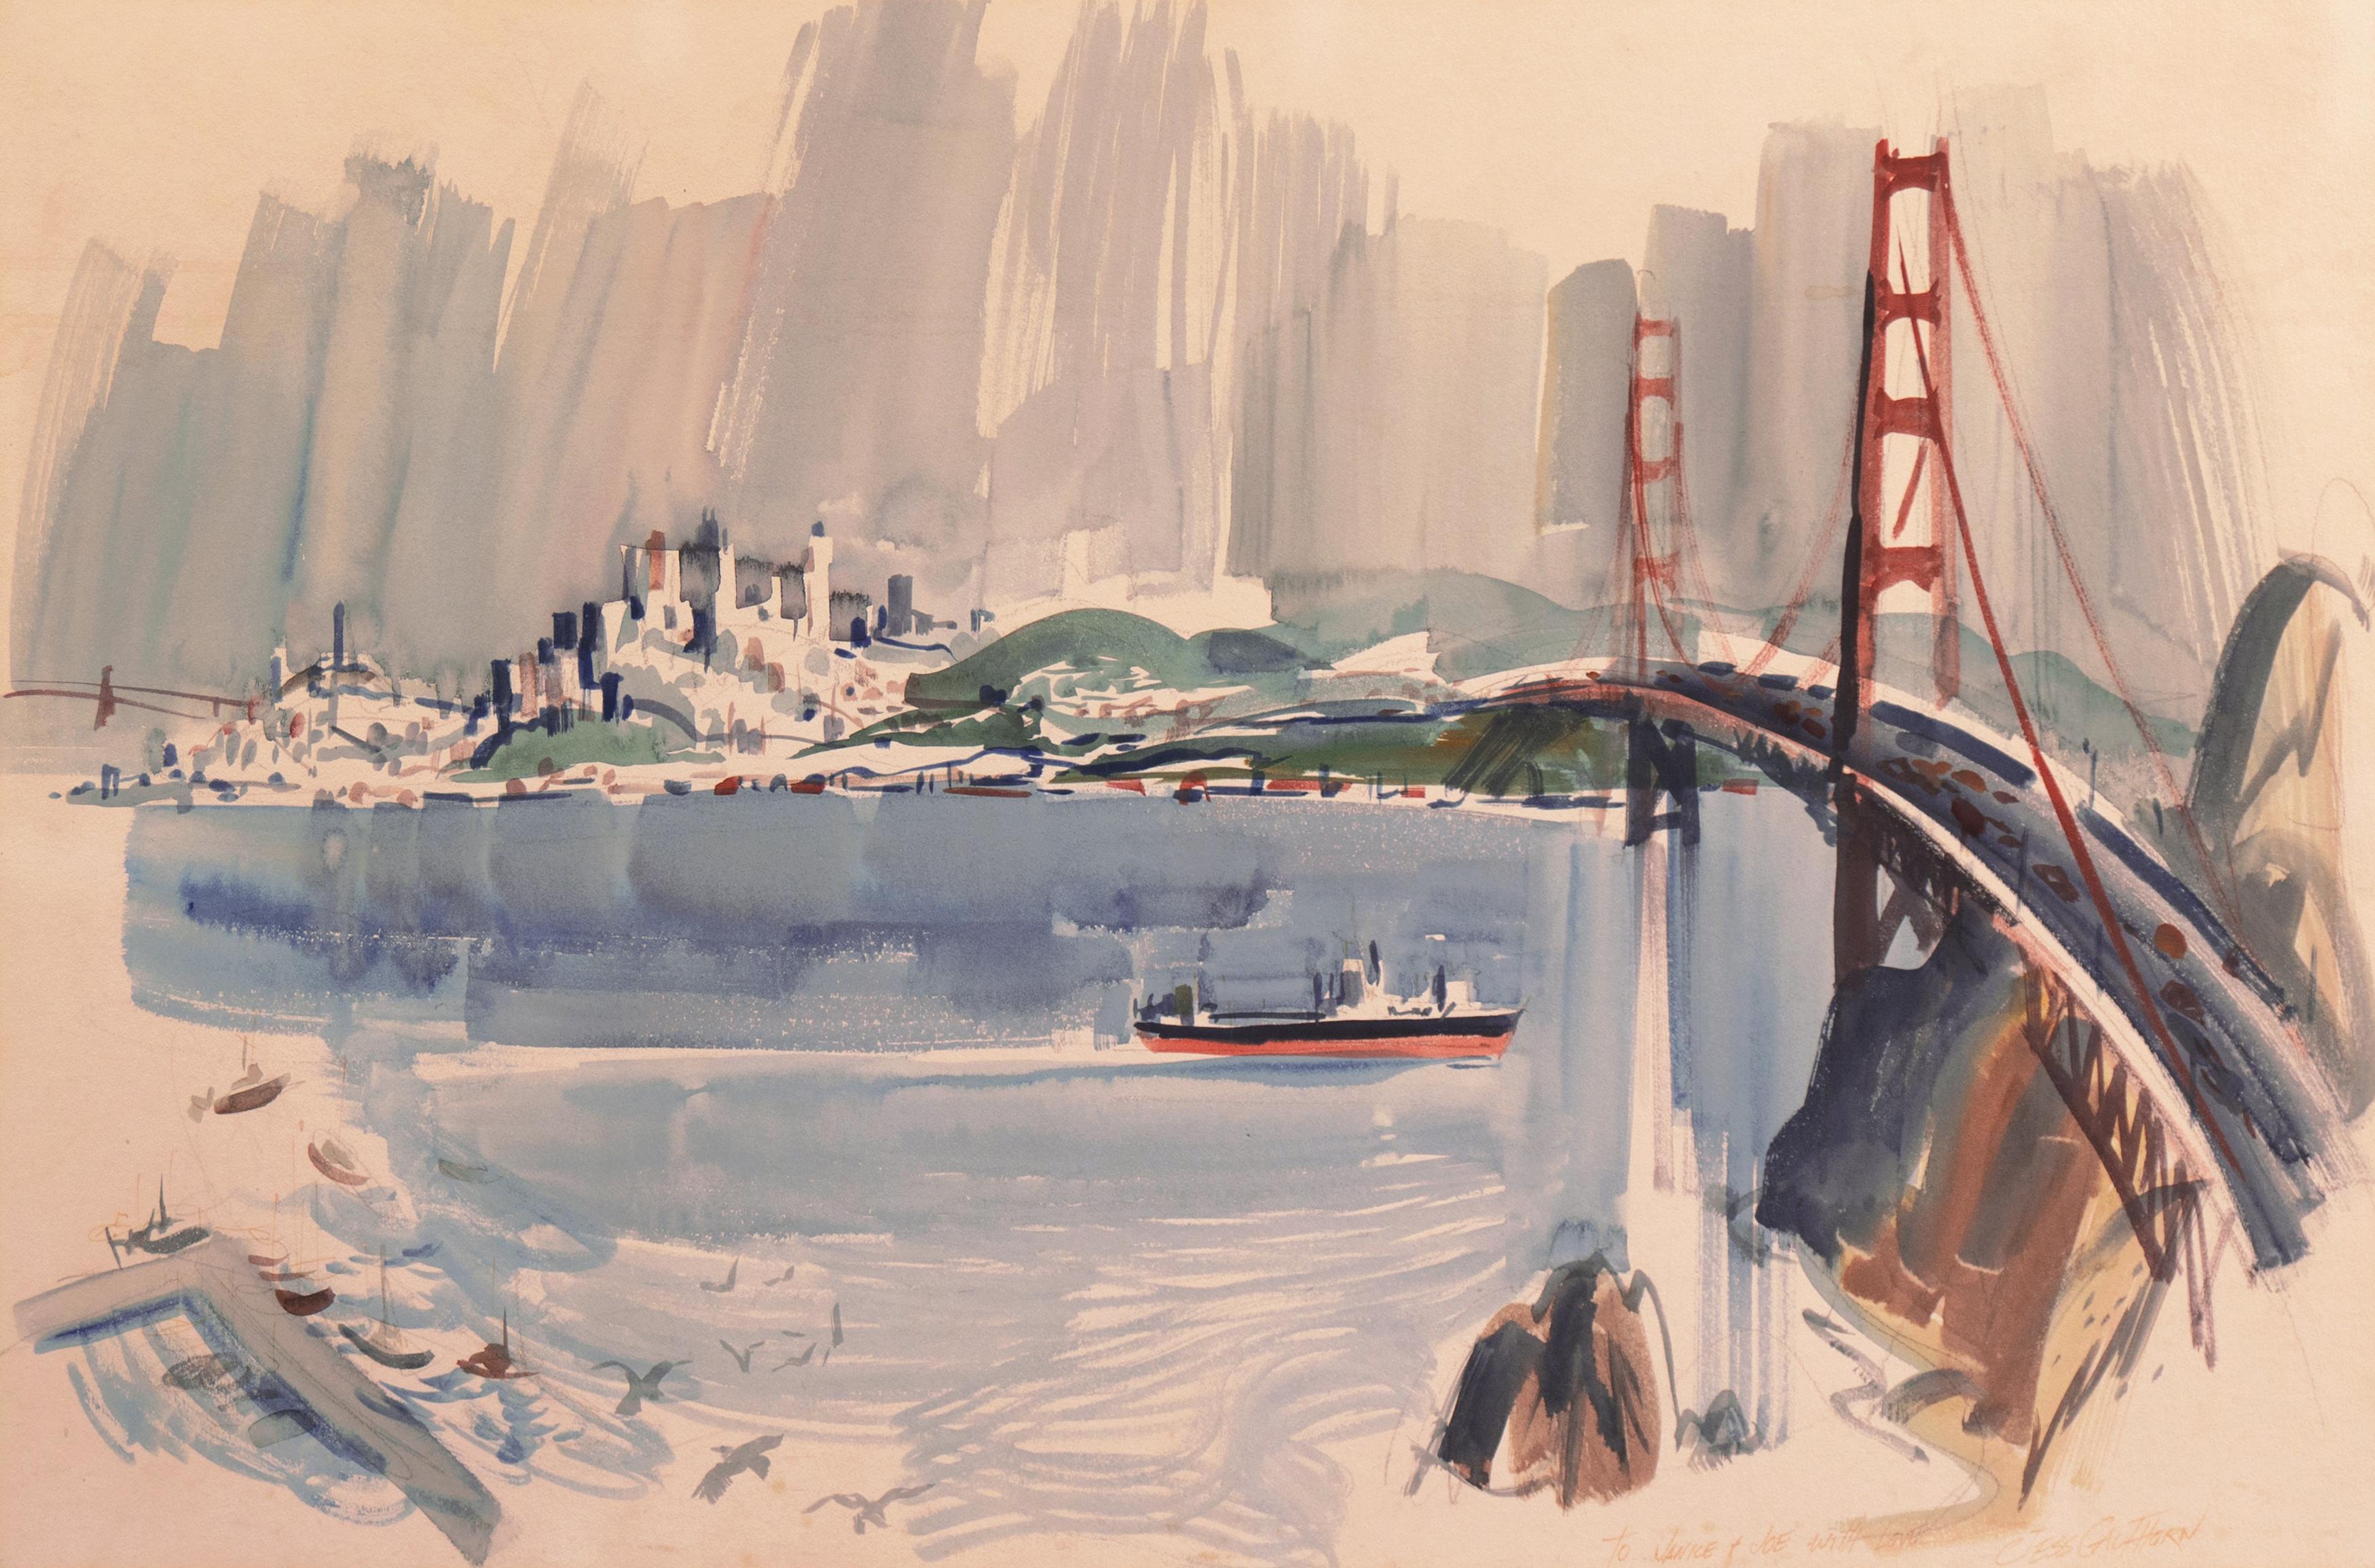 „San Francisco from Marin“, Seattle, SAM, Frye Museum, Golden Gate, Sausalito